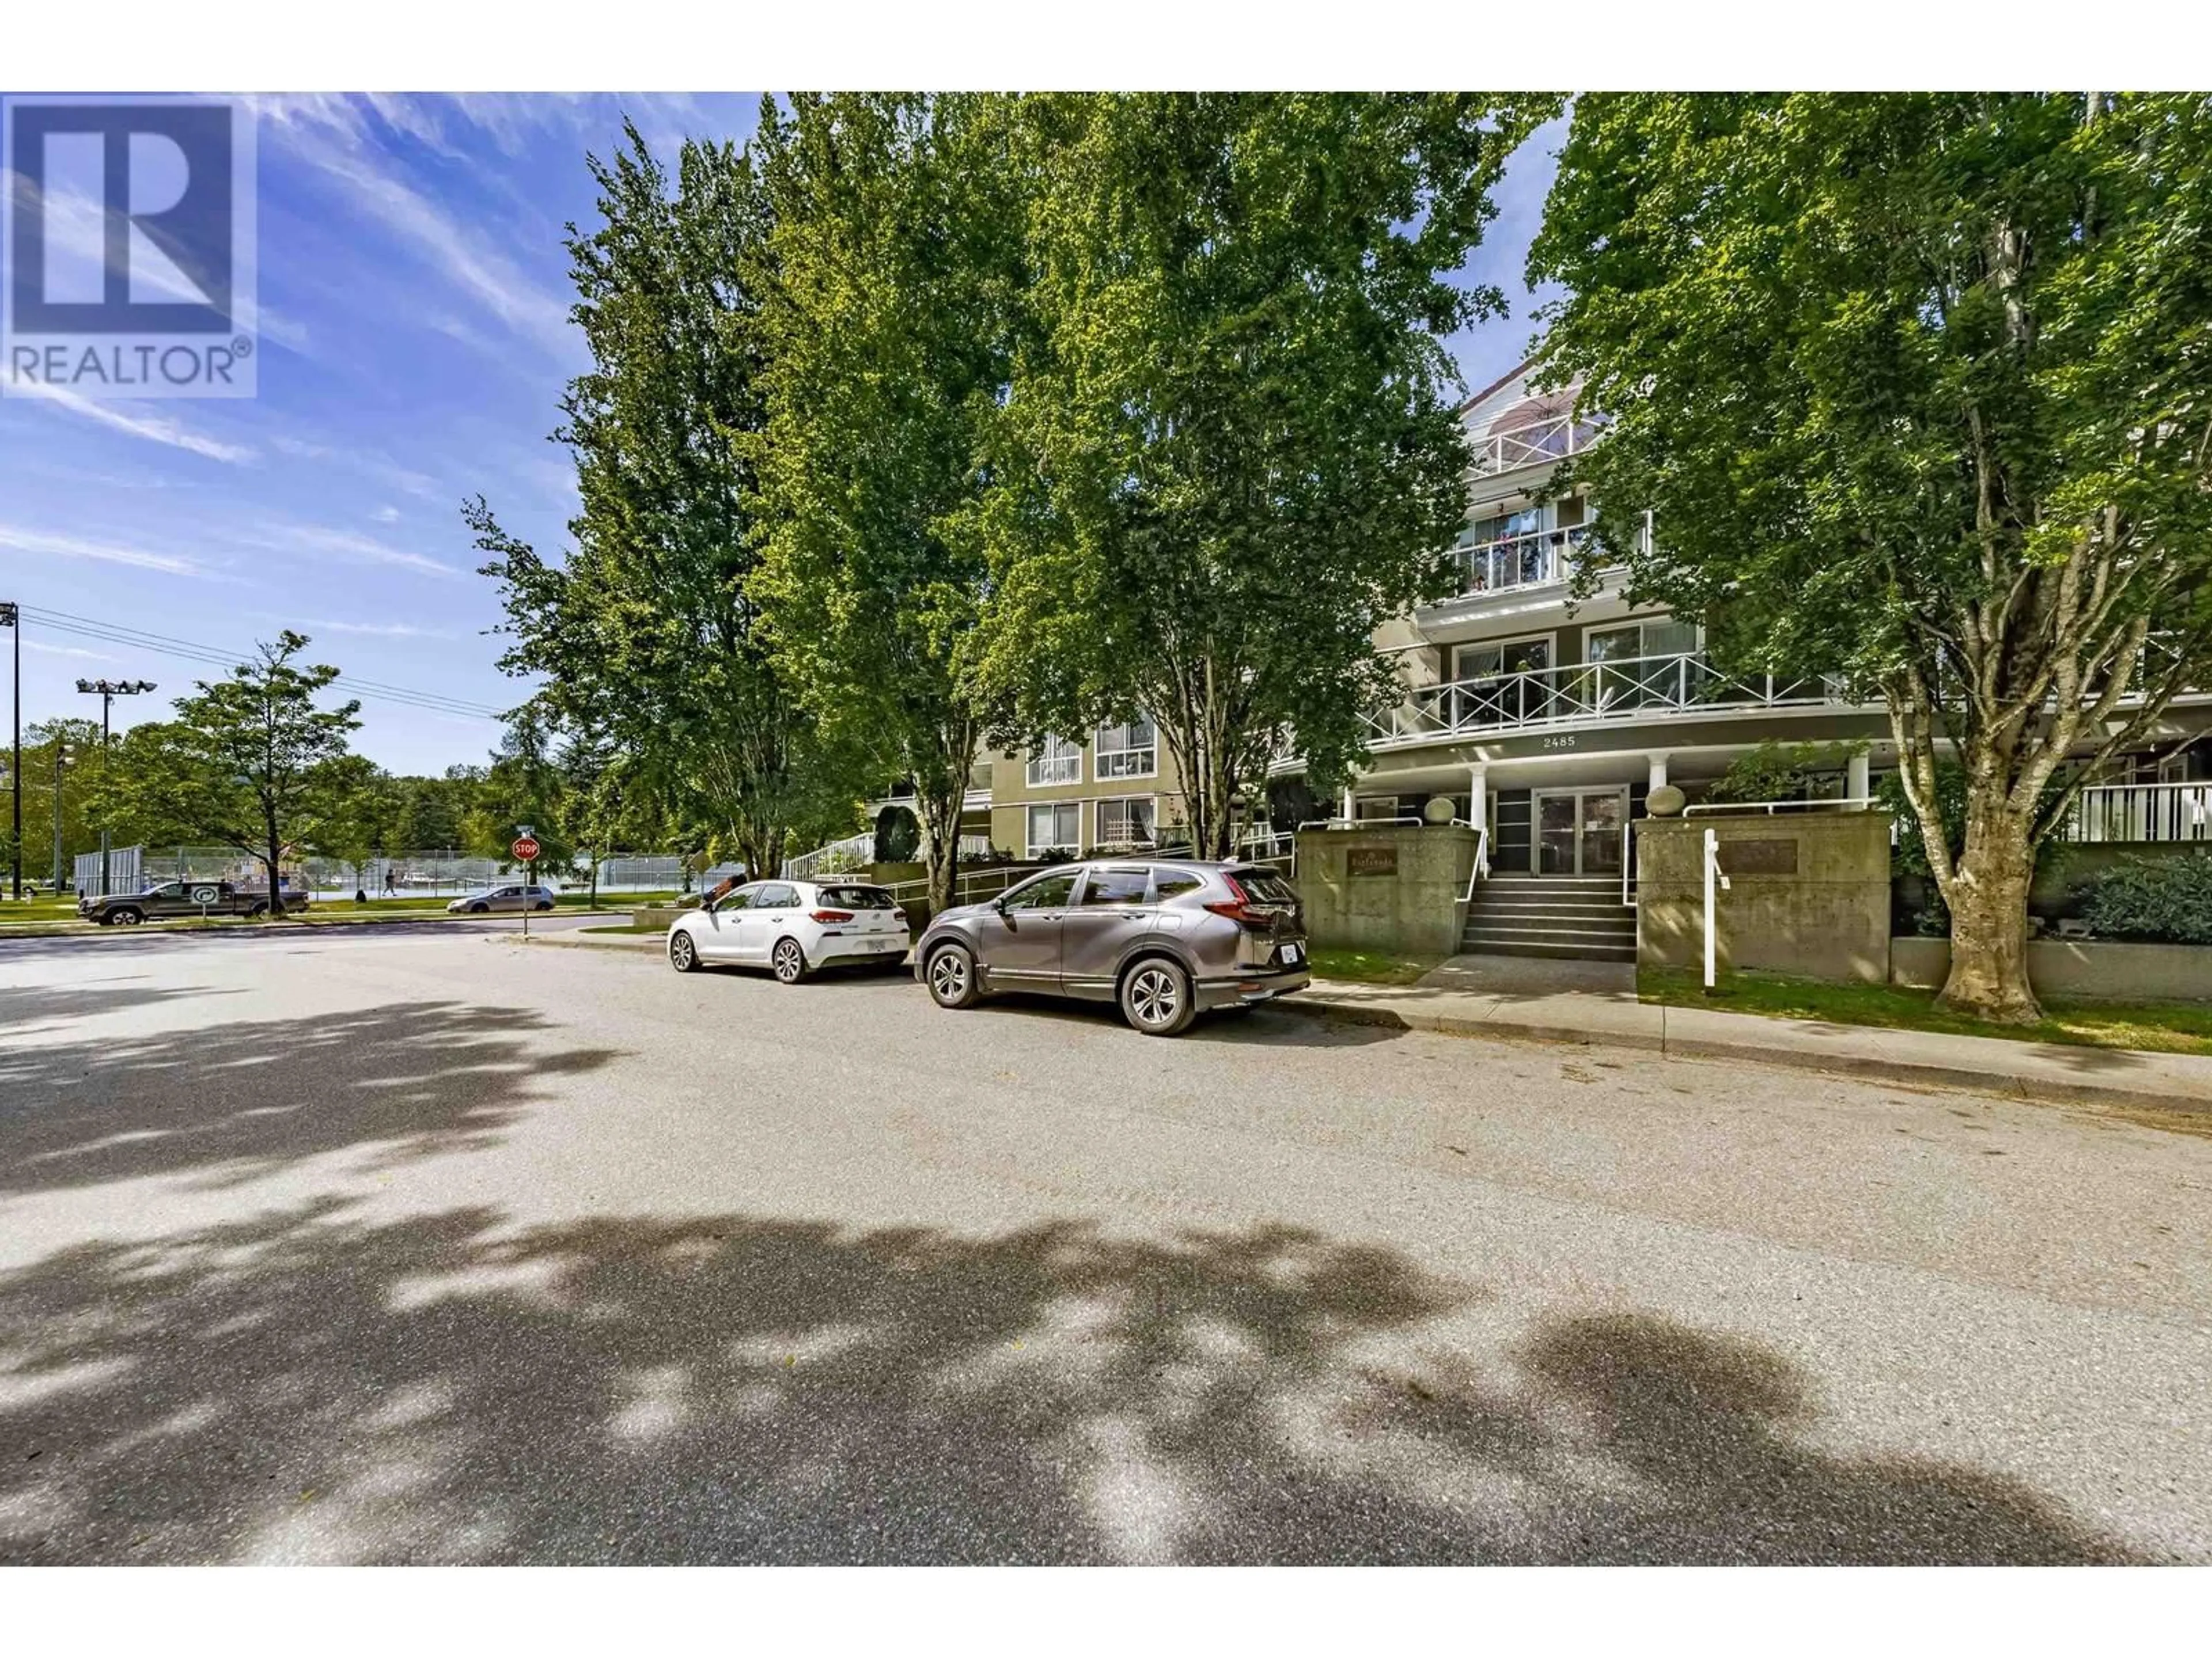 A pic from exterior of the house or condo for 205 2485 ATKINS AVENUE, Port Coquitlam British Columbia V3C1Z1